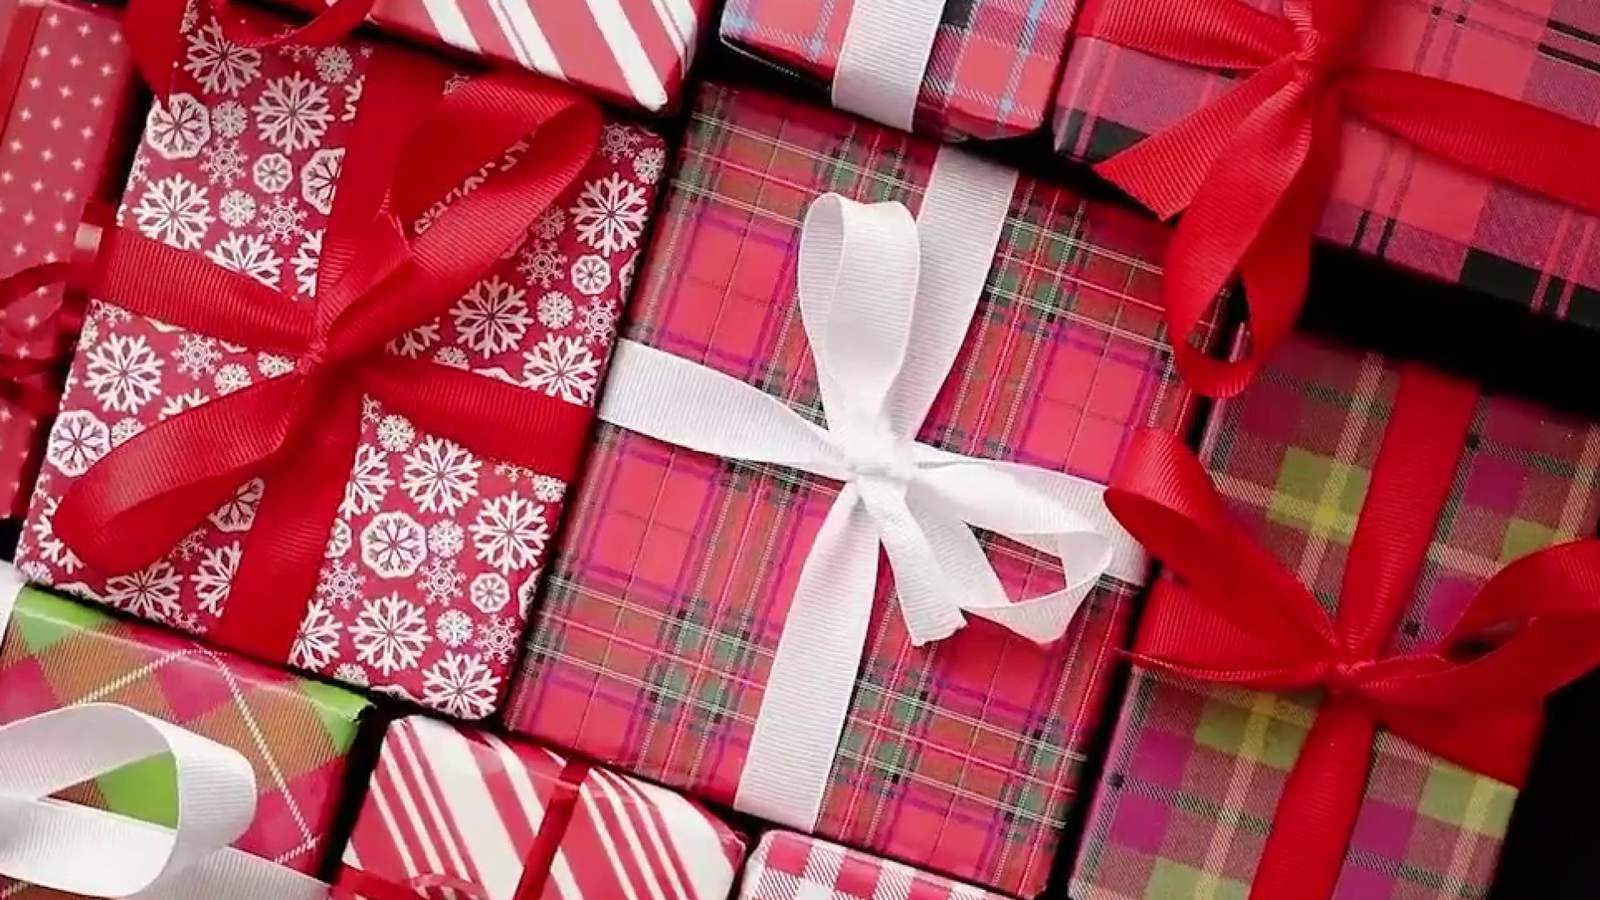 The history behind wrapping paper, and how it became a holiday tradition